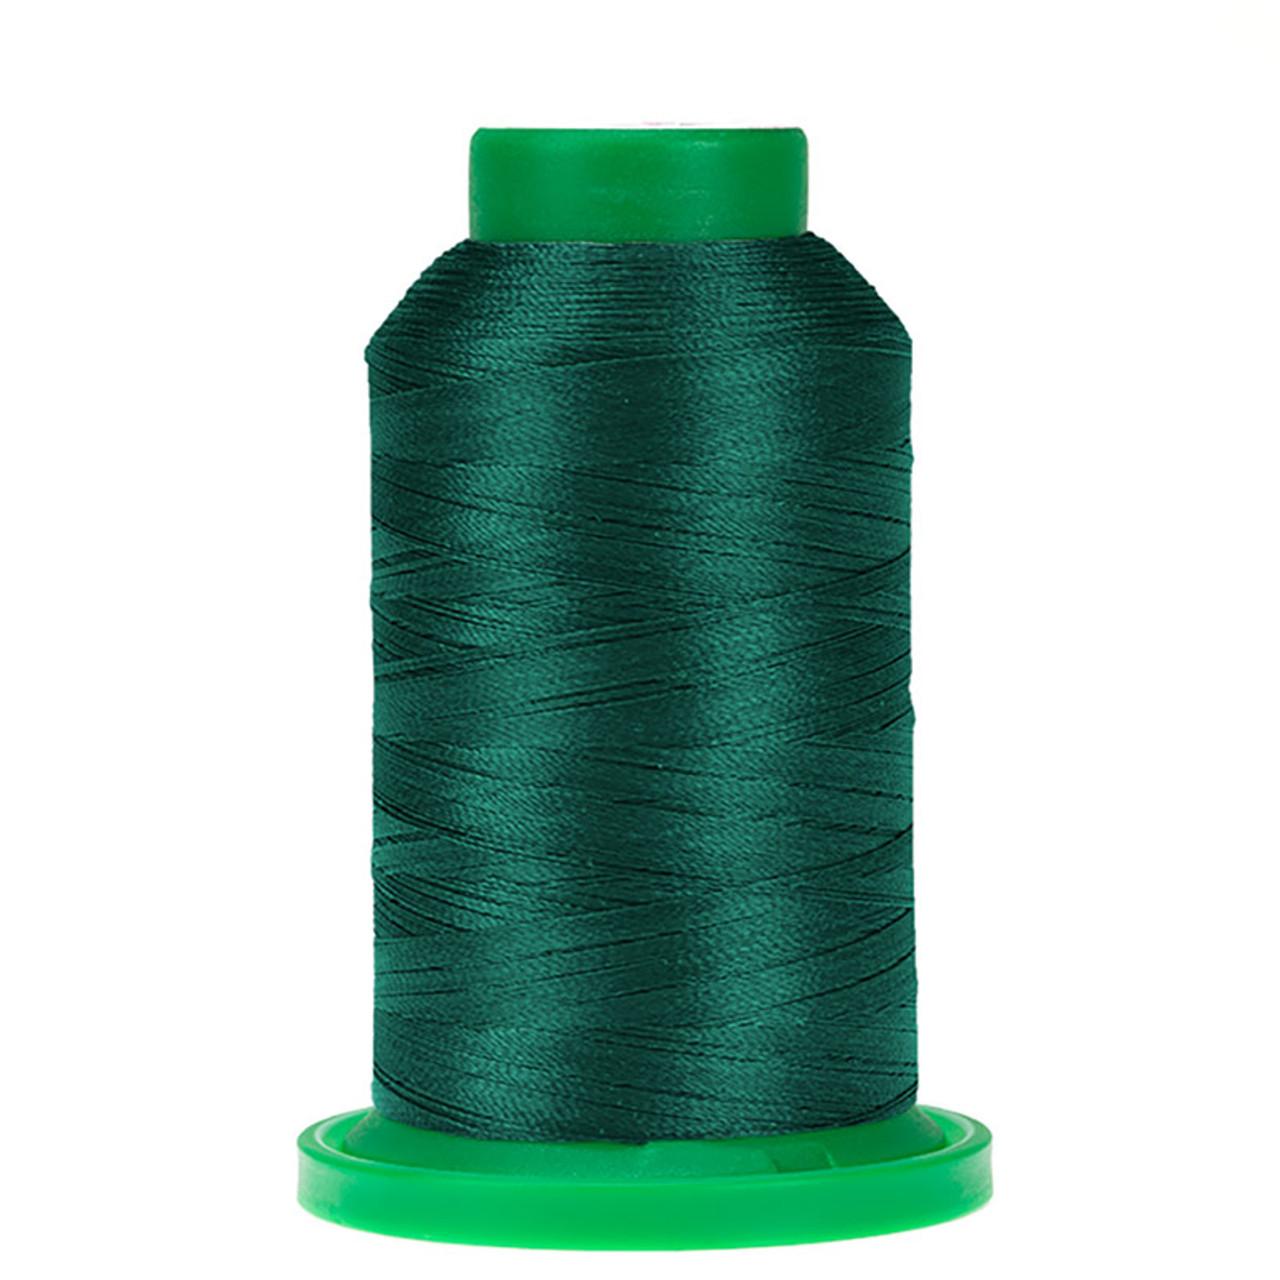 Thread - Isacord - Rain Forest - 2922-5005 - SPECIAL ORDER